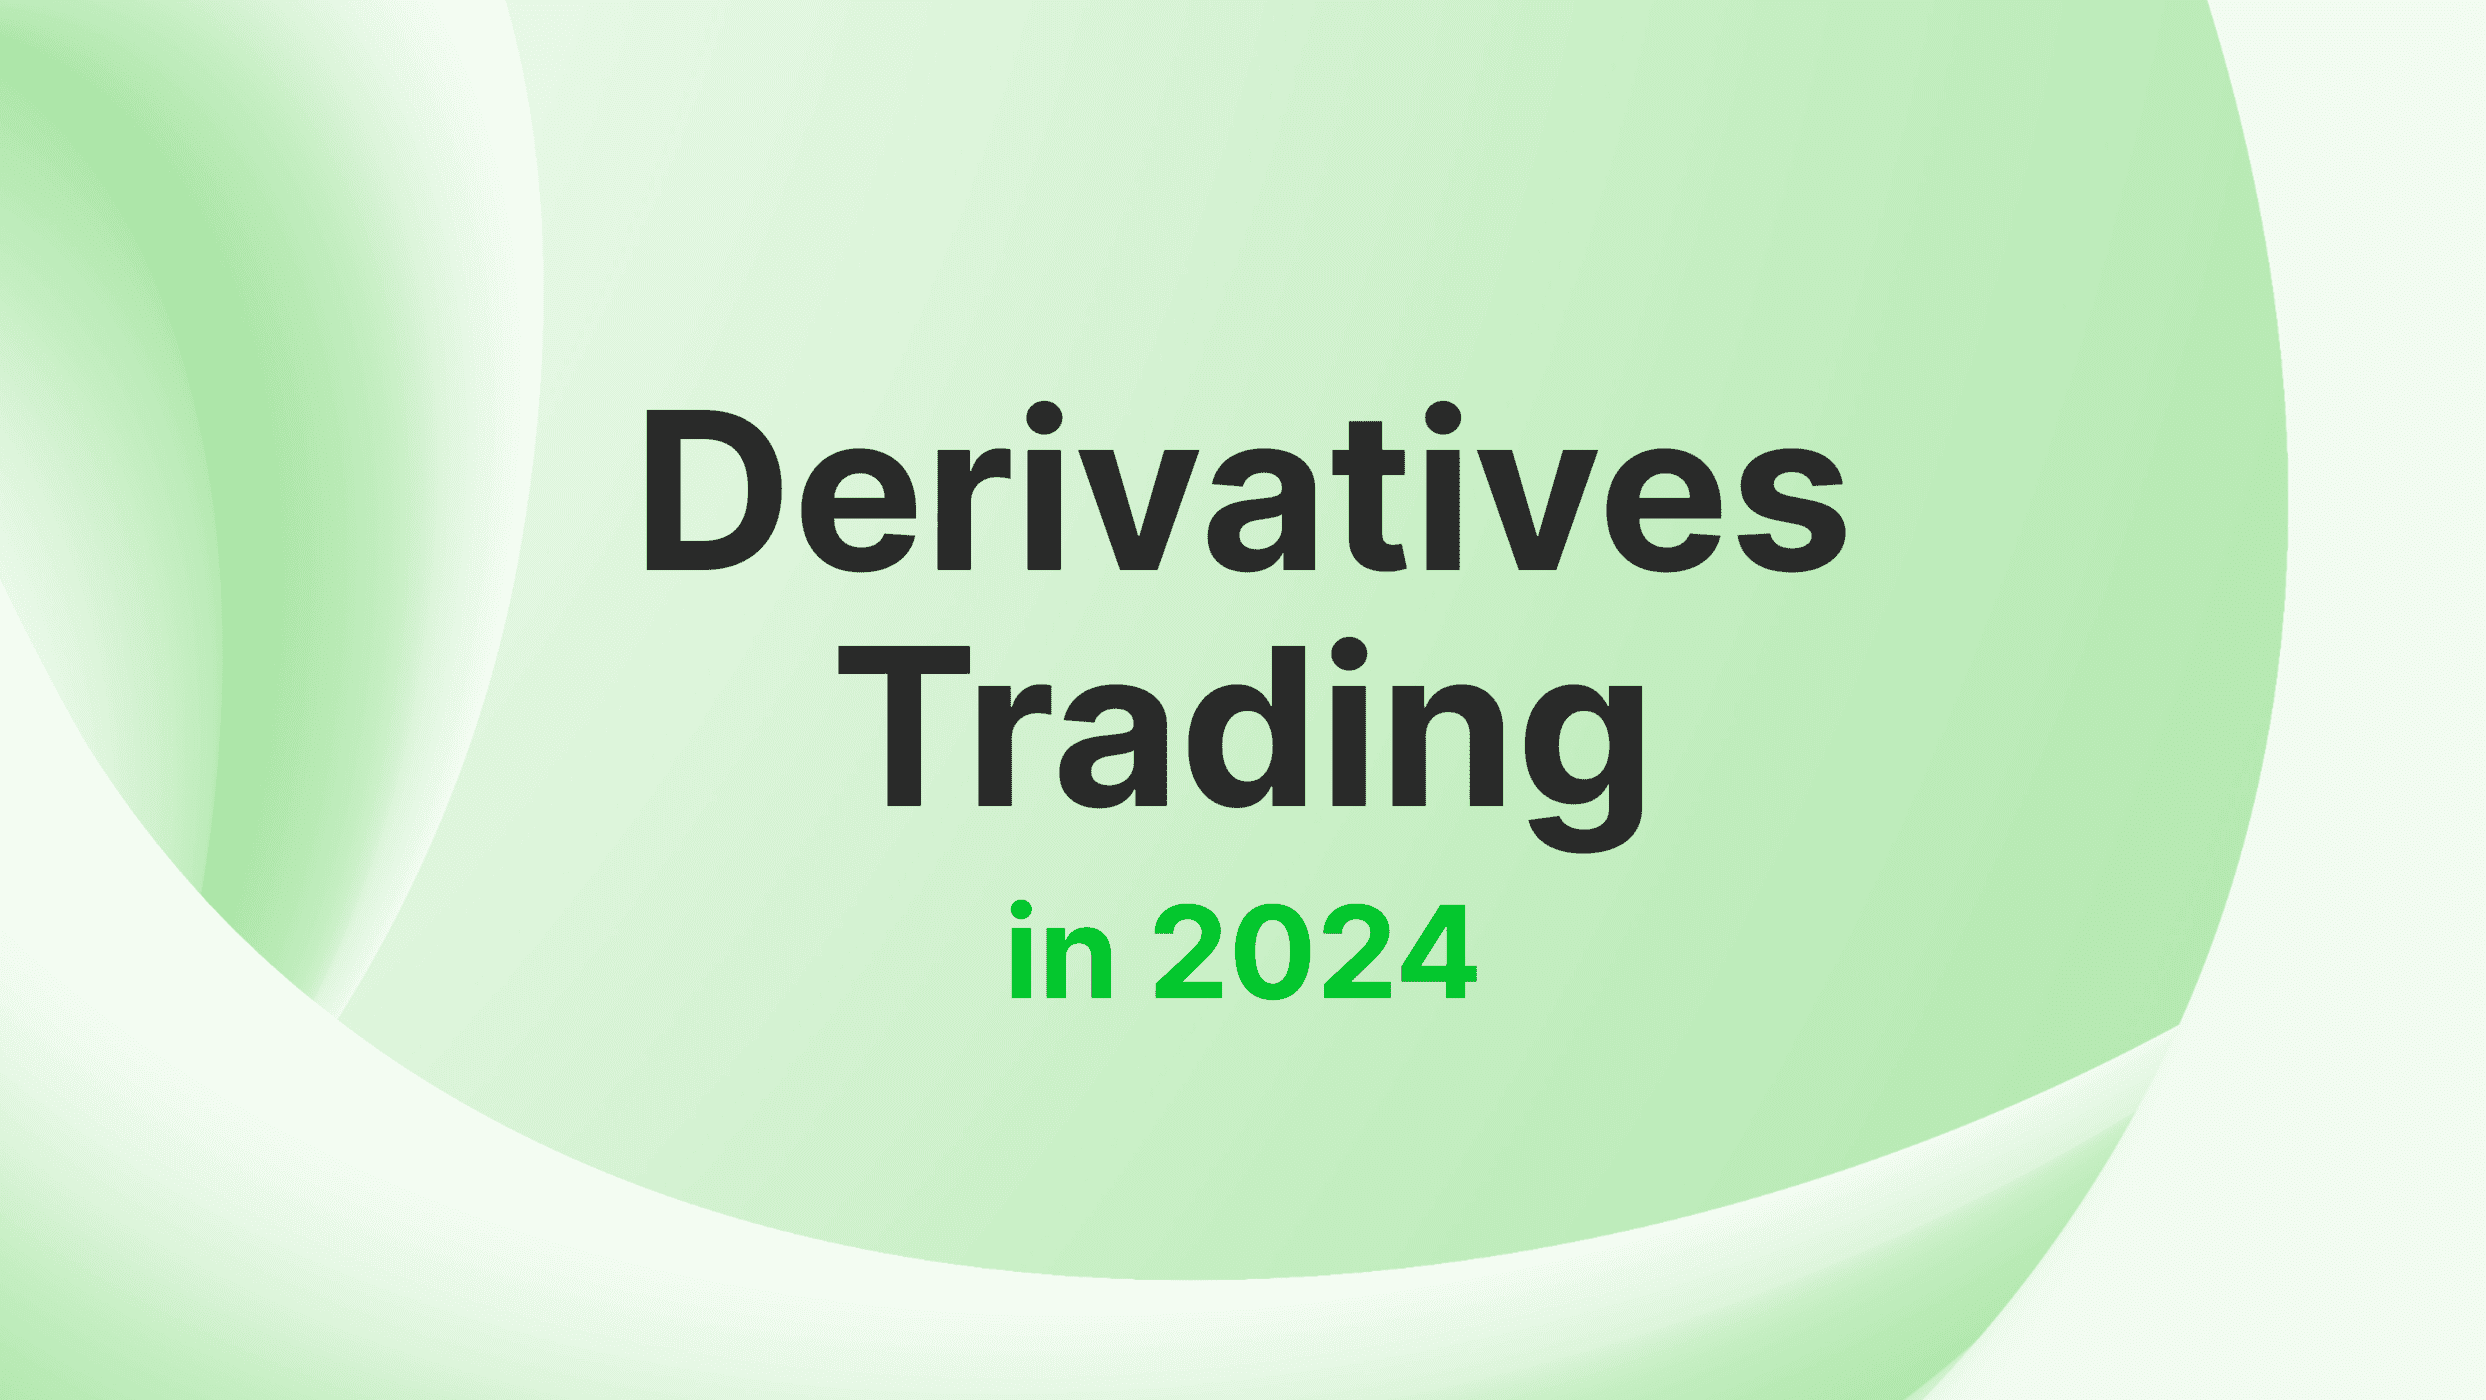 The Derivatives Trading Market is Growing - Here’s Why